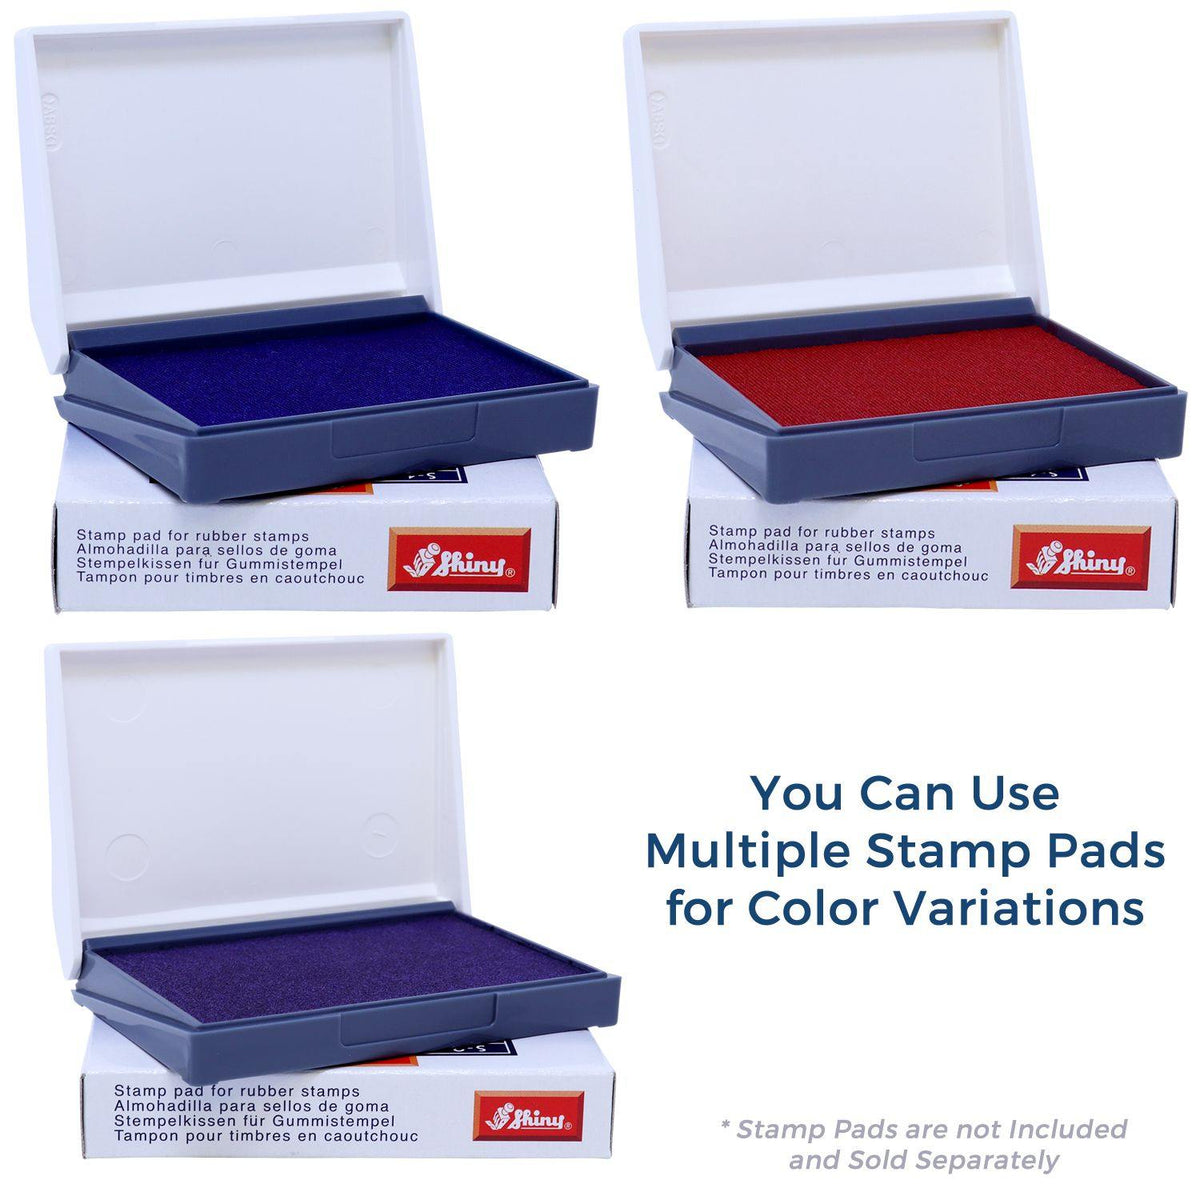 Stamp Pads for Large Bravo Rubber Stamp Available